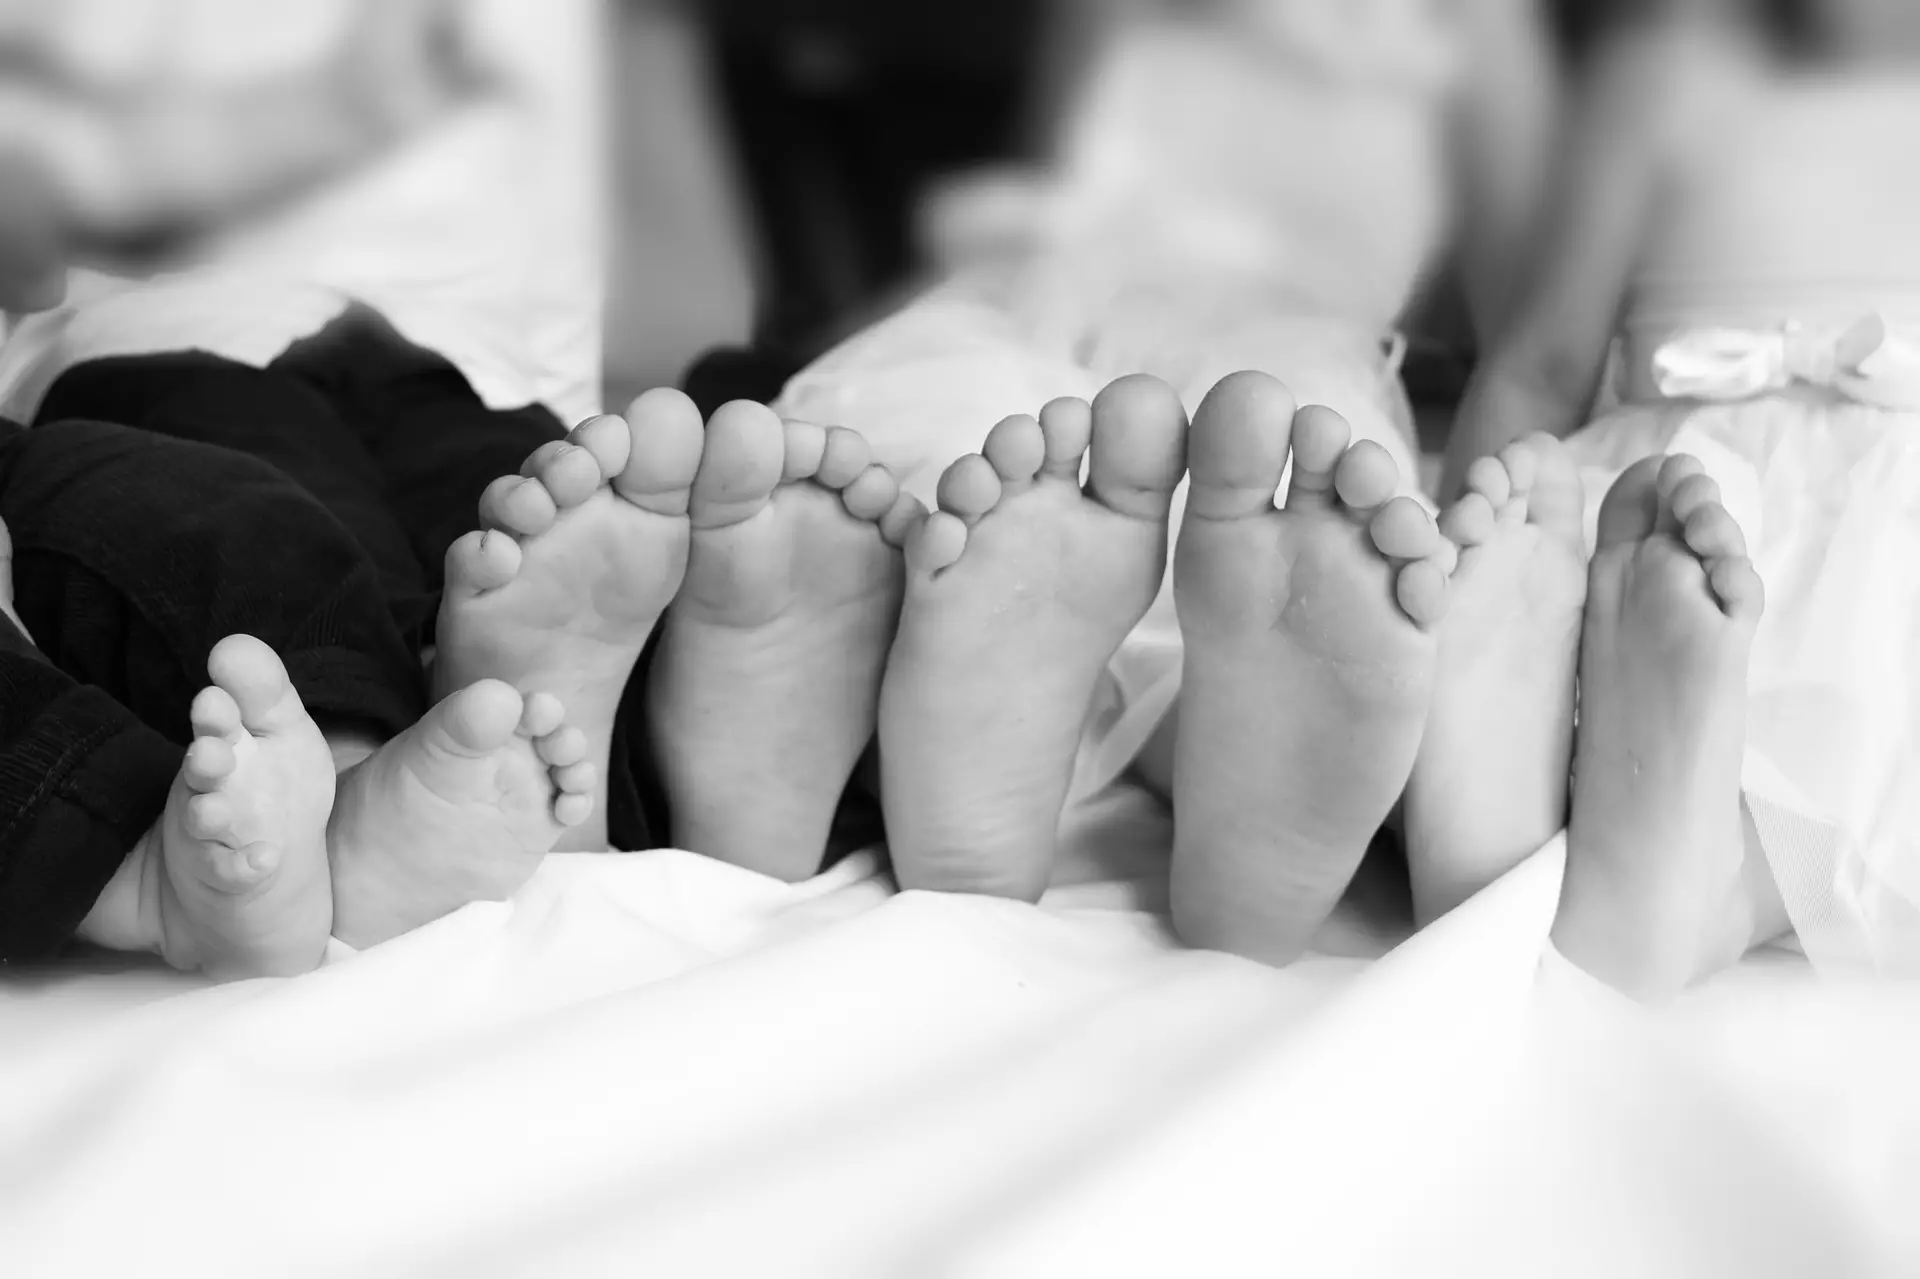 feet of 4 young kids